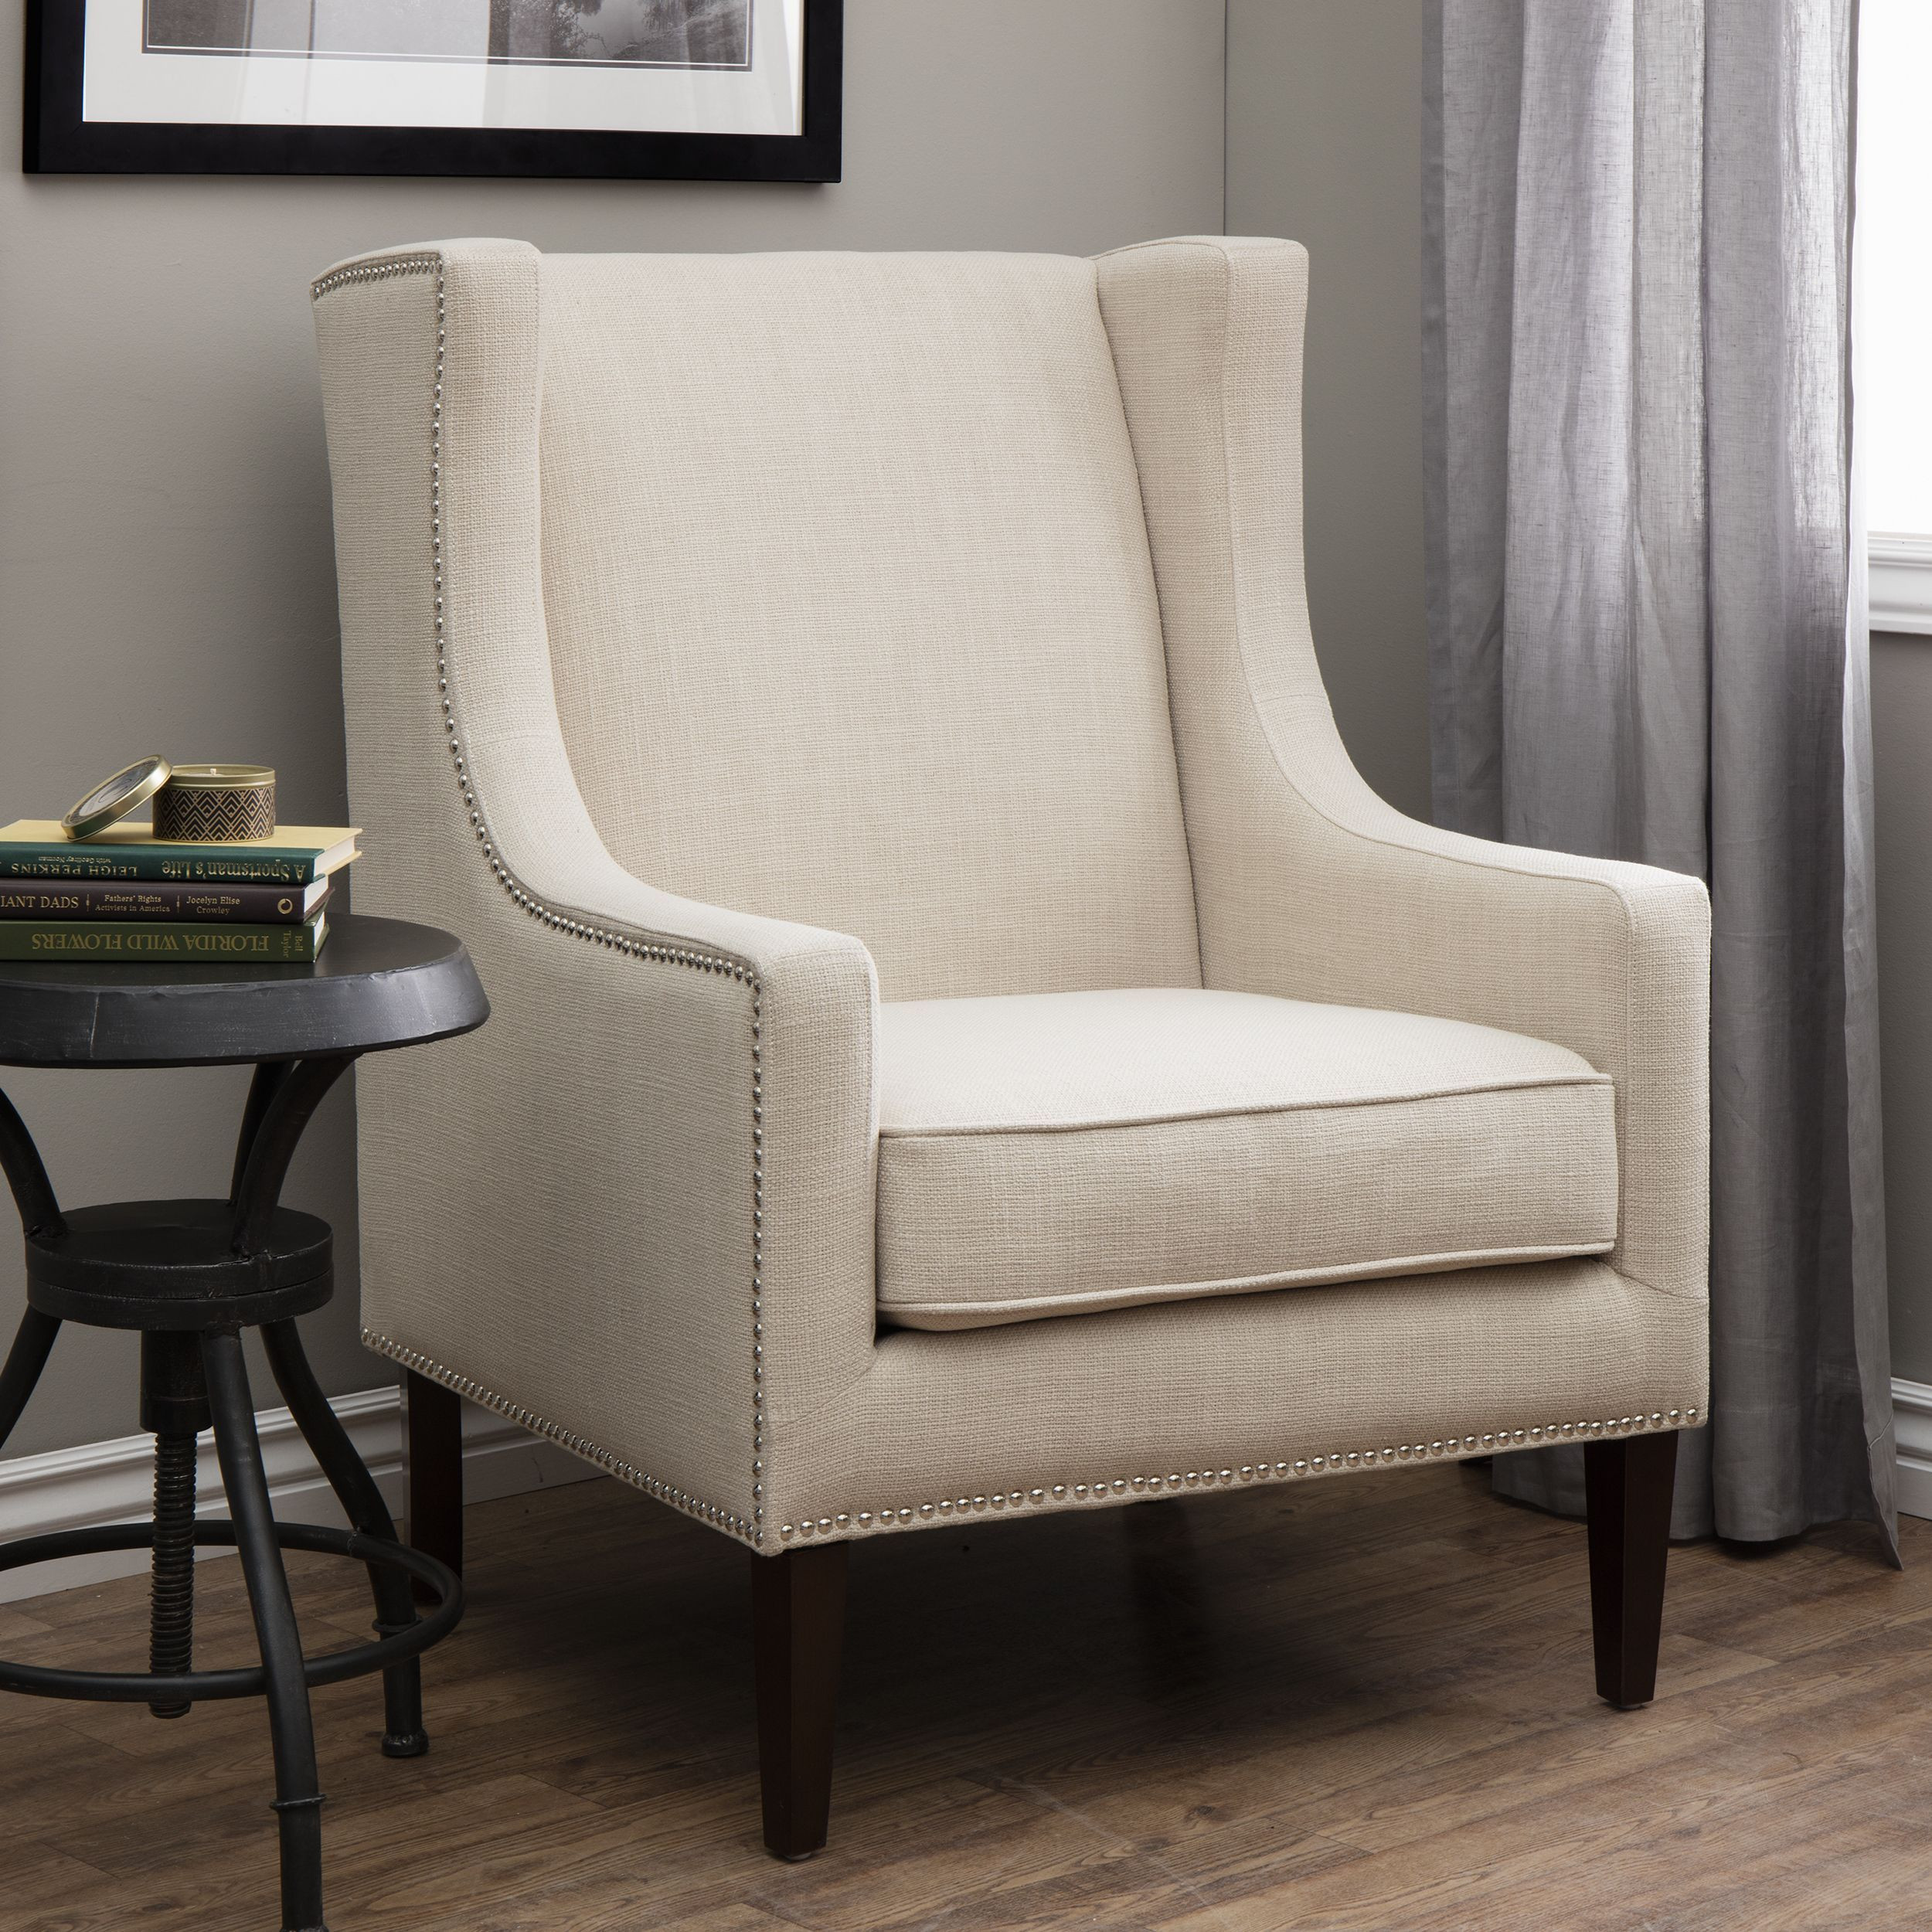 Wingback Living Room Chairs
 Add a modern touch to your home decor with this stylish